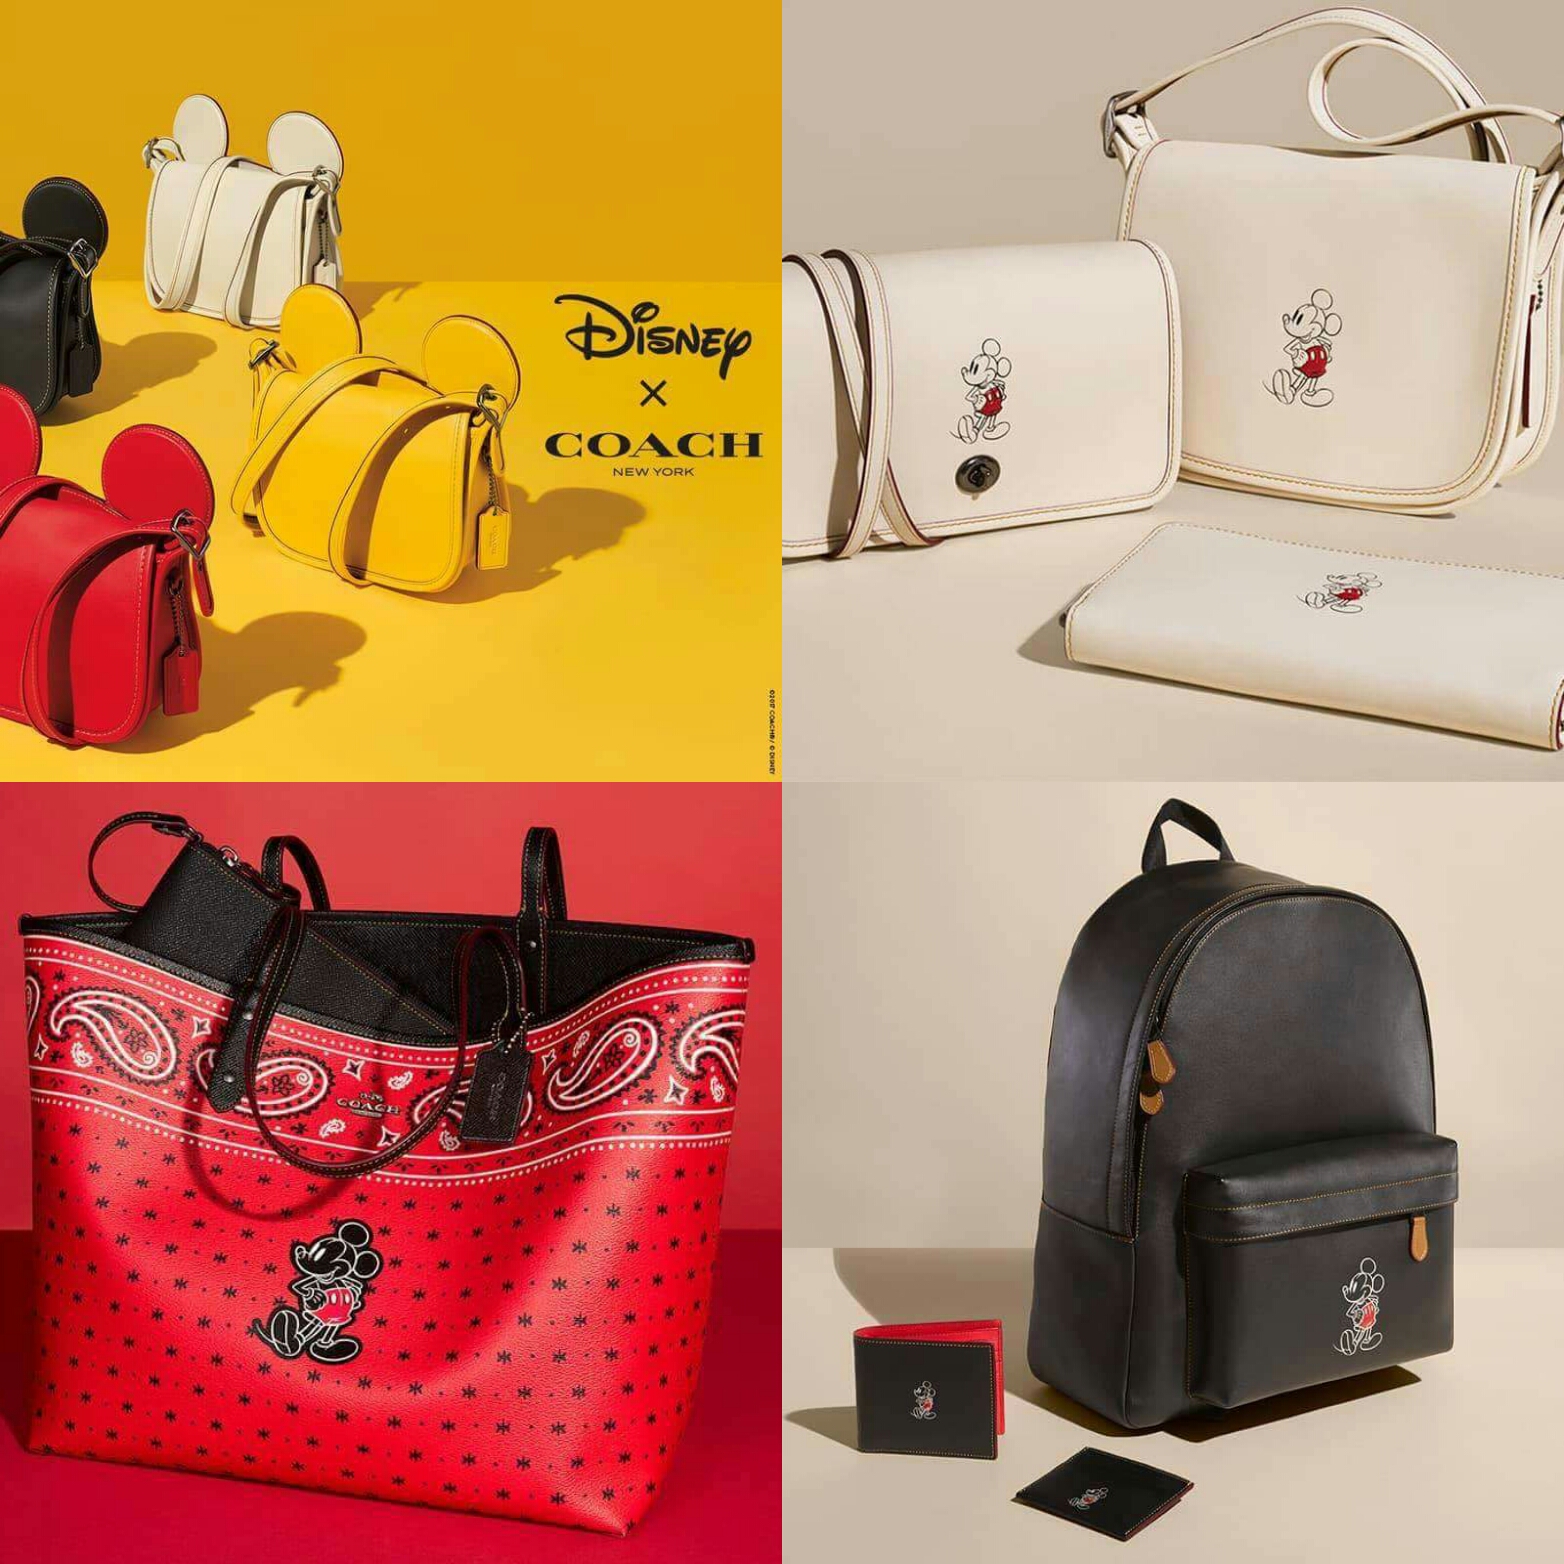 Disney x Coach Outlet Edition to Be Released May 15th! Fashion